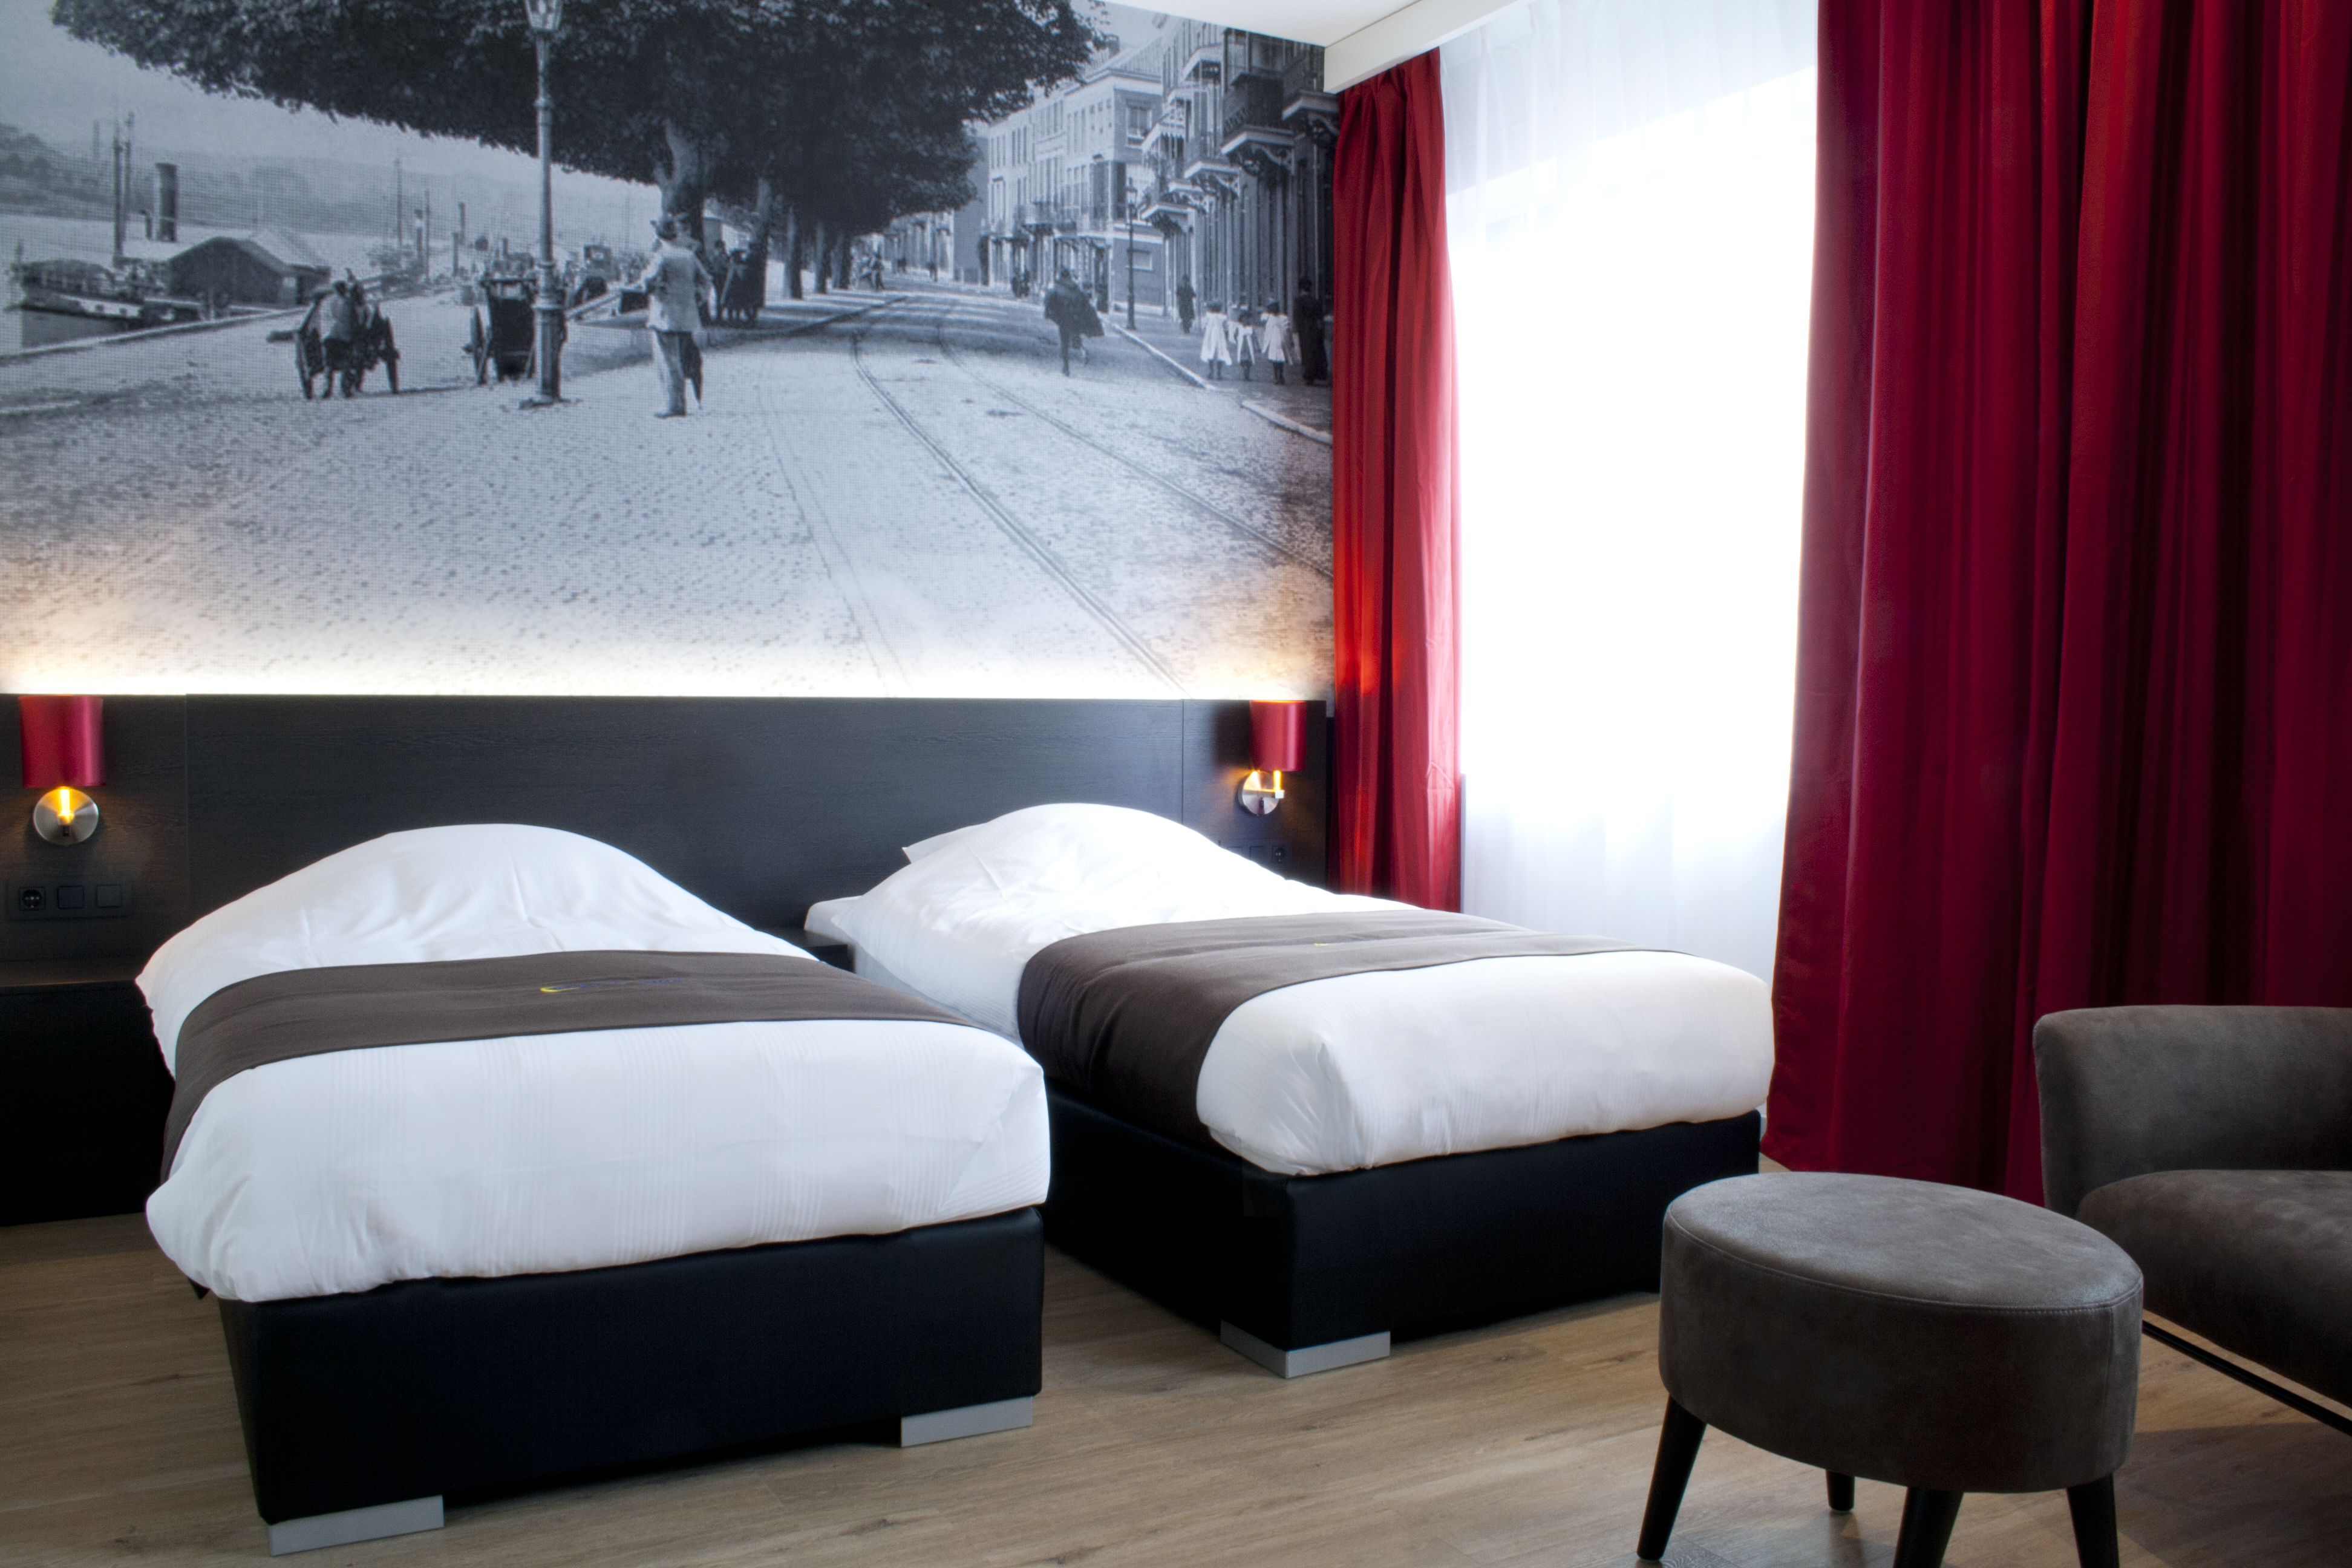 Bastion Hotel Arnhem <br/>69.00 ew <br/> <a href='http://vakantieoplossing.nl/outpage/?id=beacfed39c895f511f42af8a251044a0' target='_blank'>View Details</a>